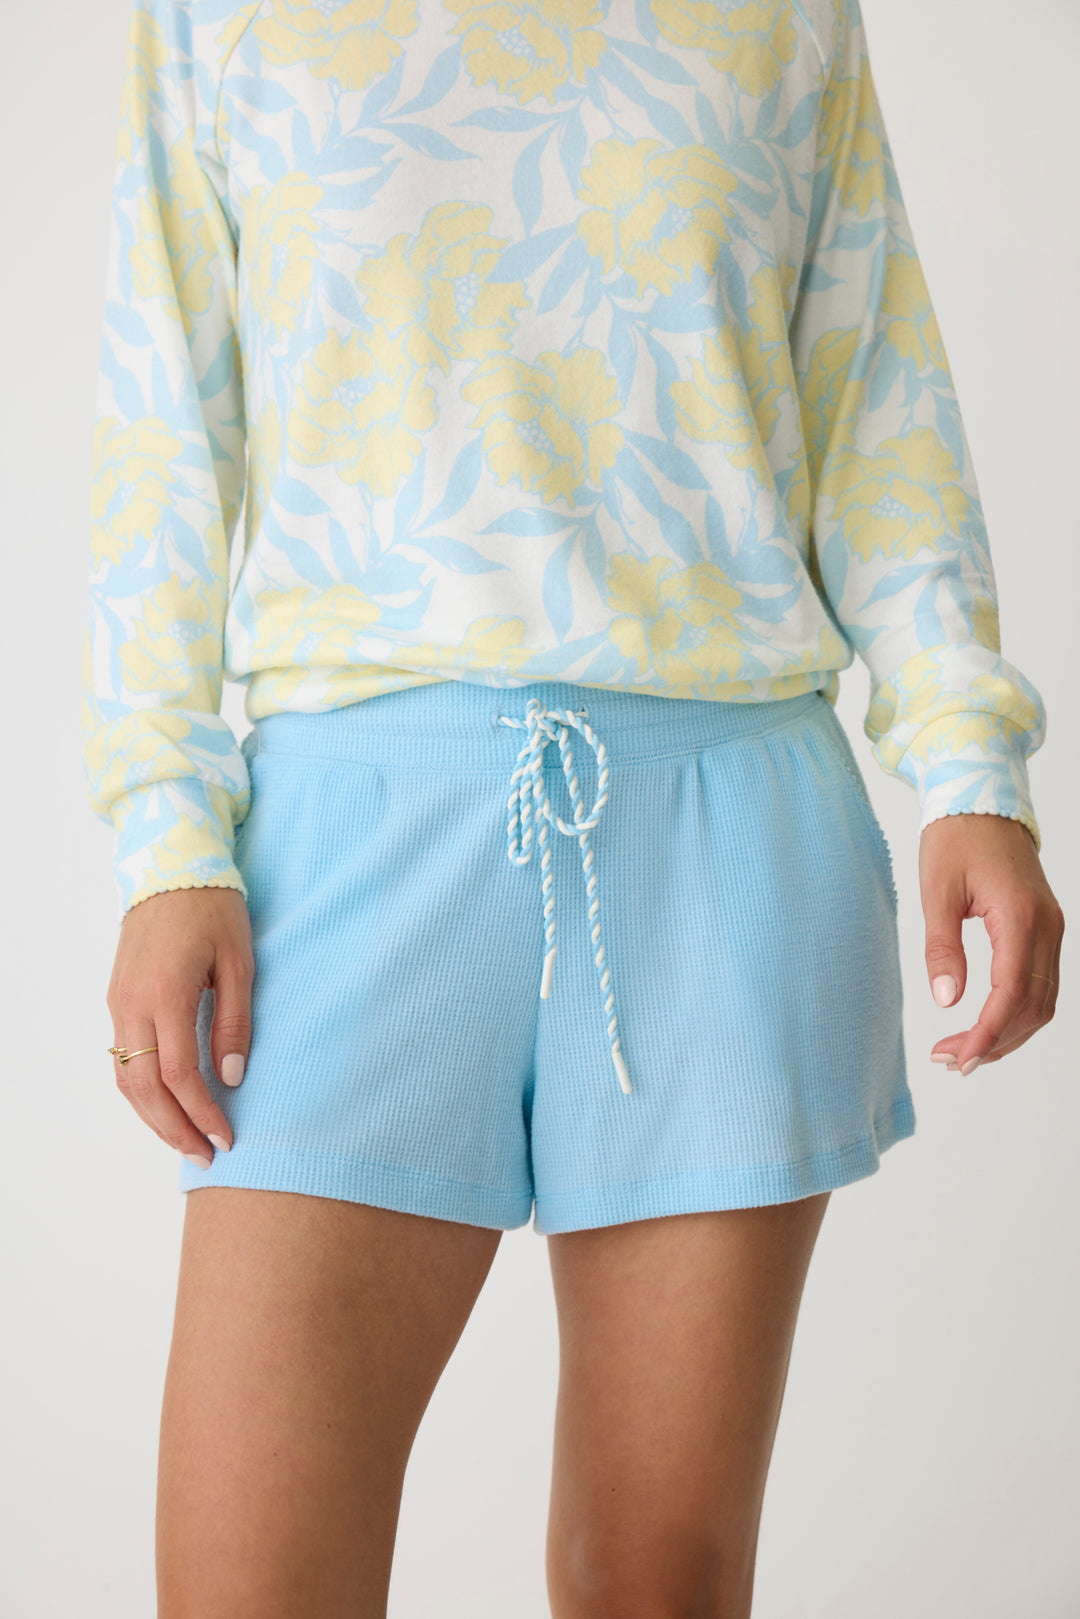 Women's short in light blue baby waffle knit with side pockets & multi-twist drawcord.